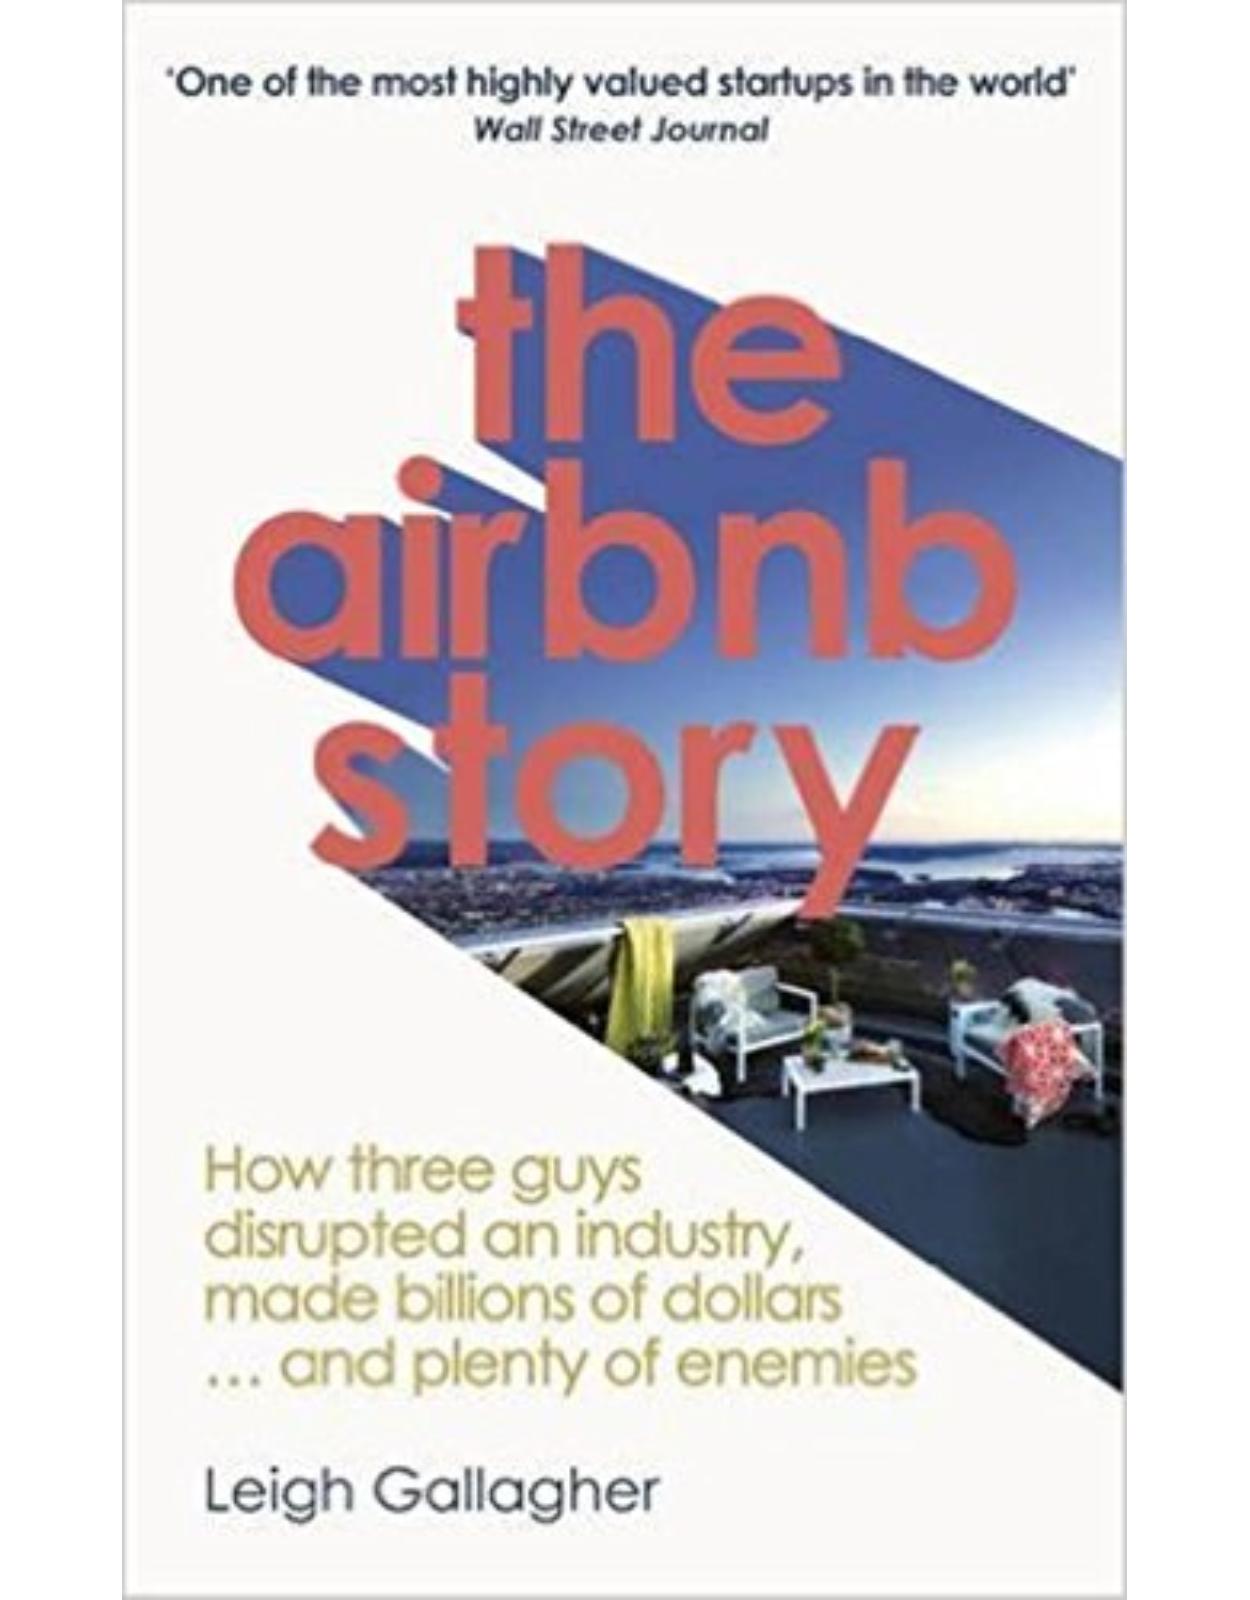 The Airbnb Story: How Three Guys Disrupted an Industry, Made Billions of Dollars … and Plenty of Enemies 